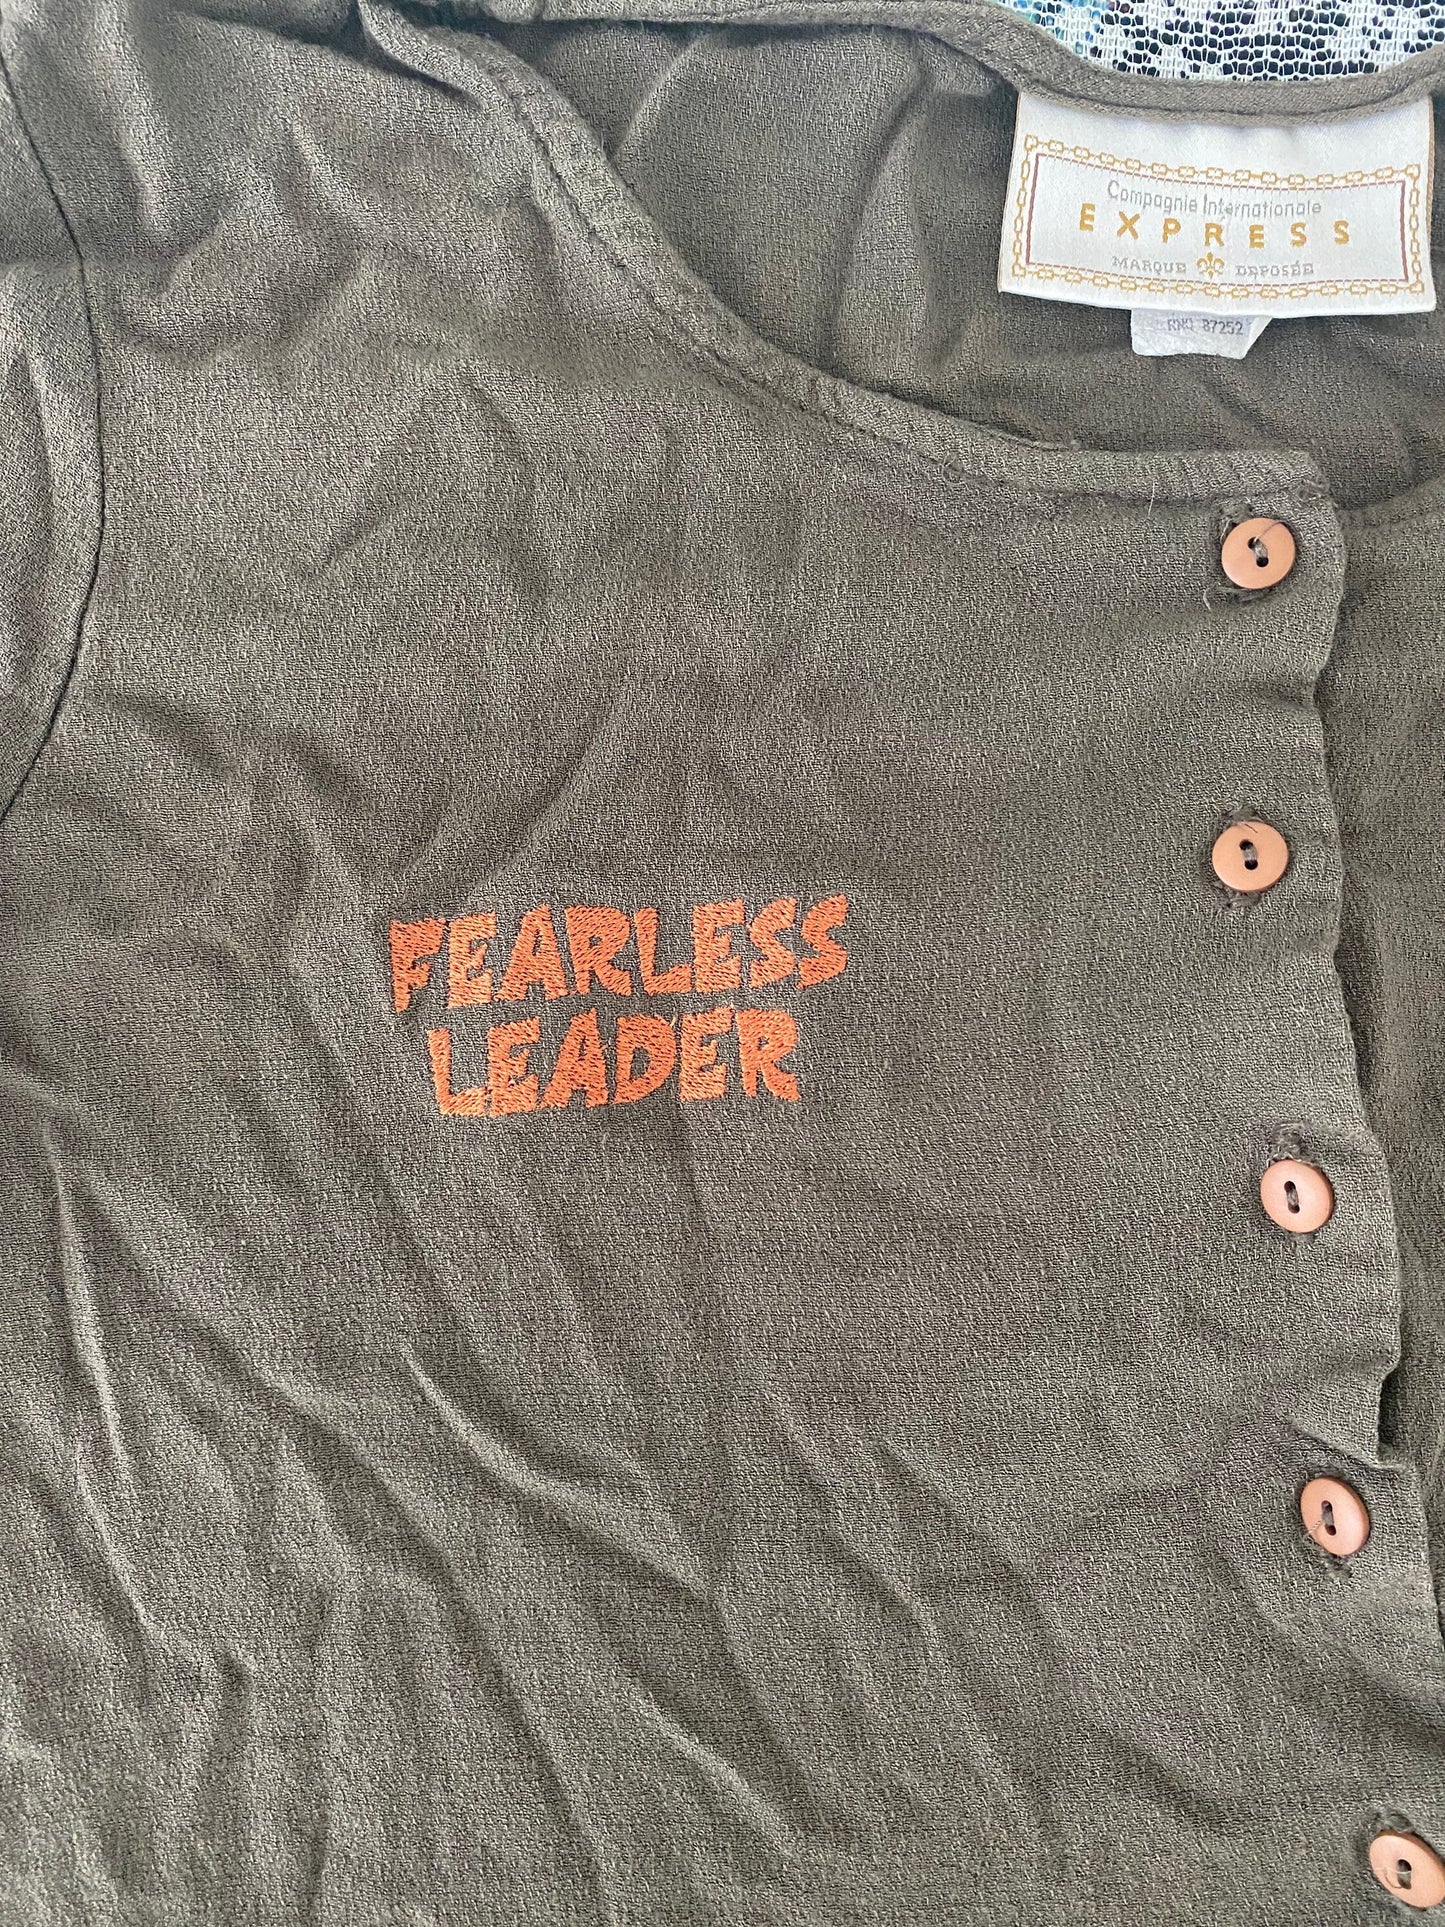 fearless leader embroidered top